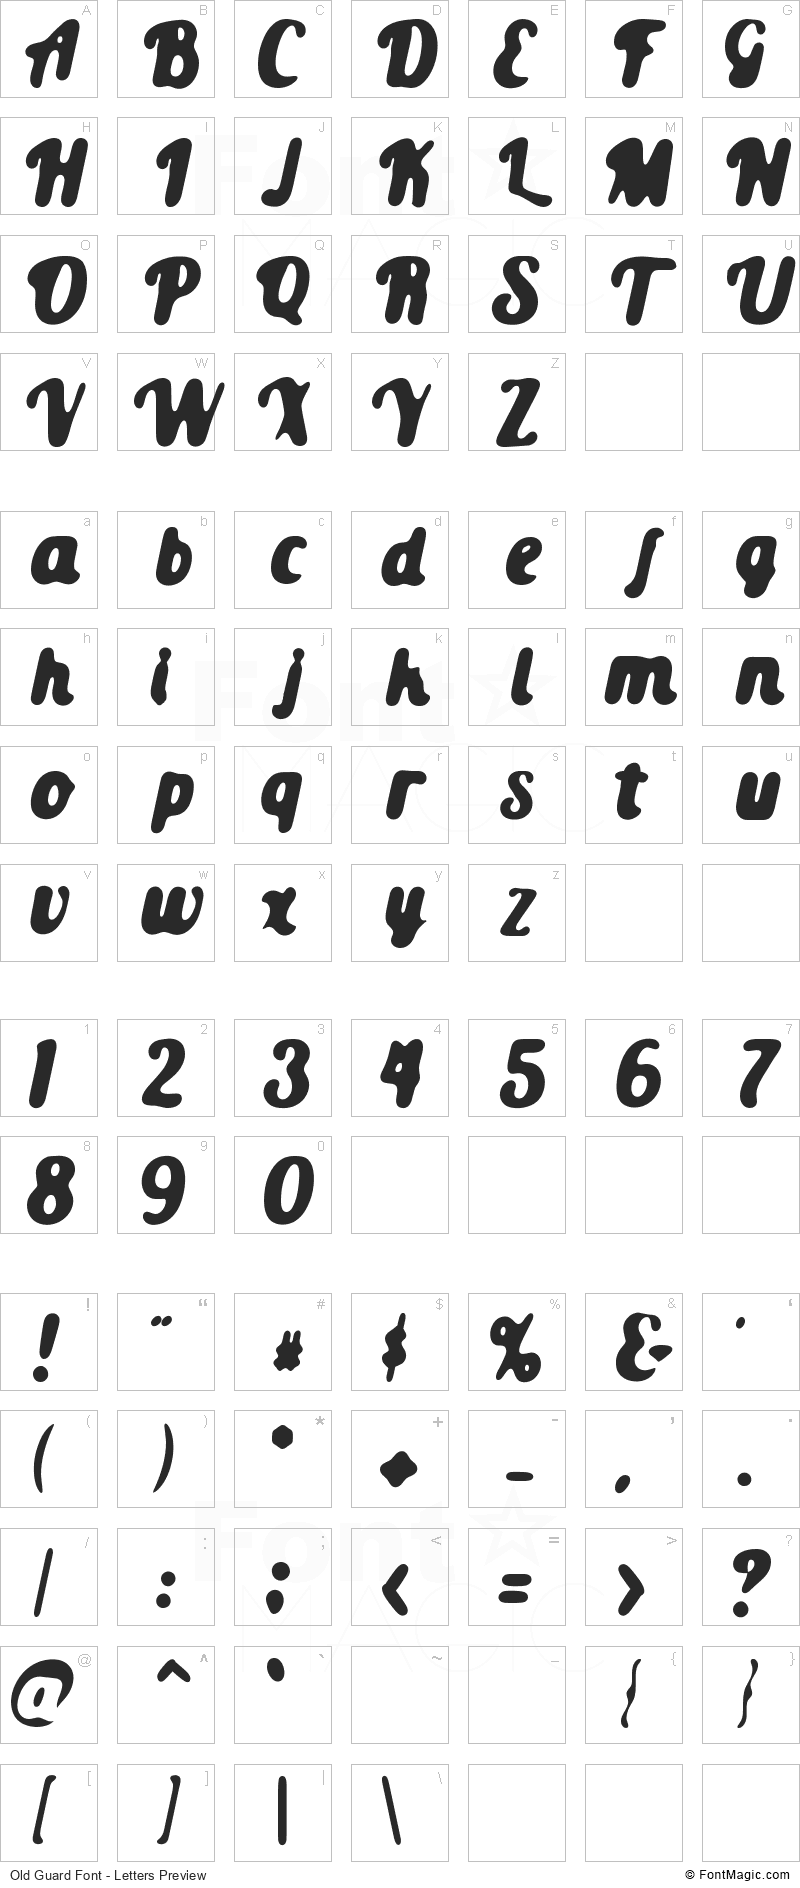 Old Guard Font - All Latters Preview Chart